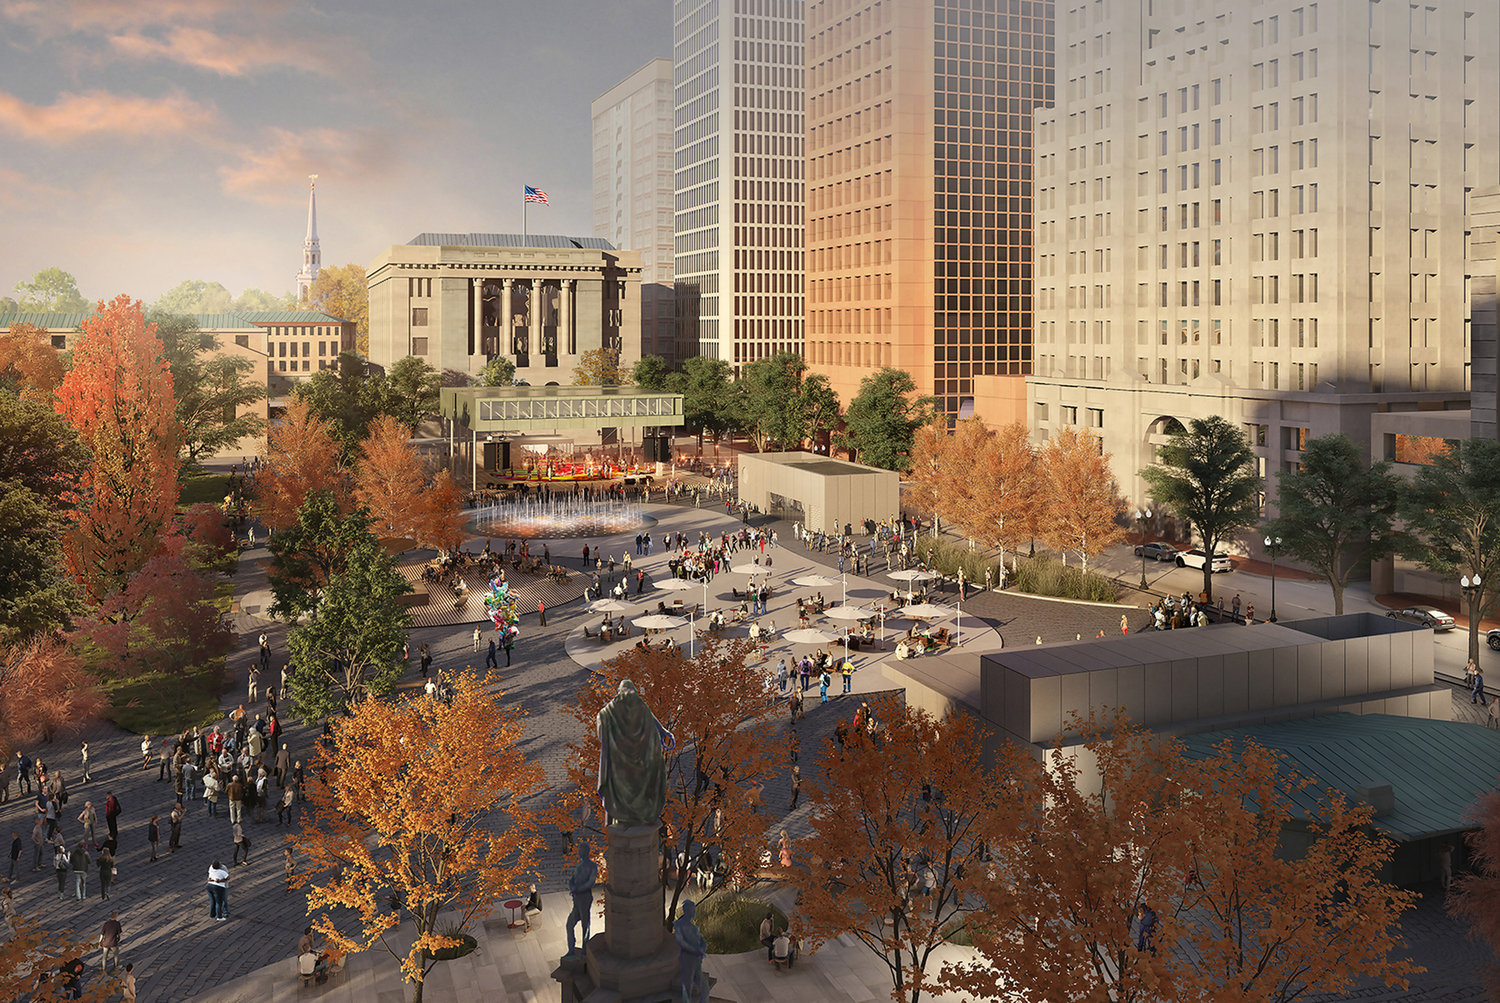 The reimagined Kennedy Plaza has “big shade” and a water feature